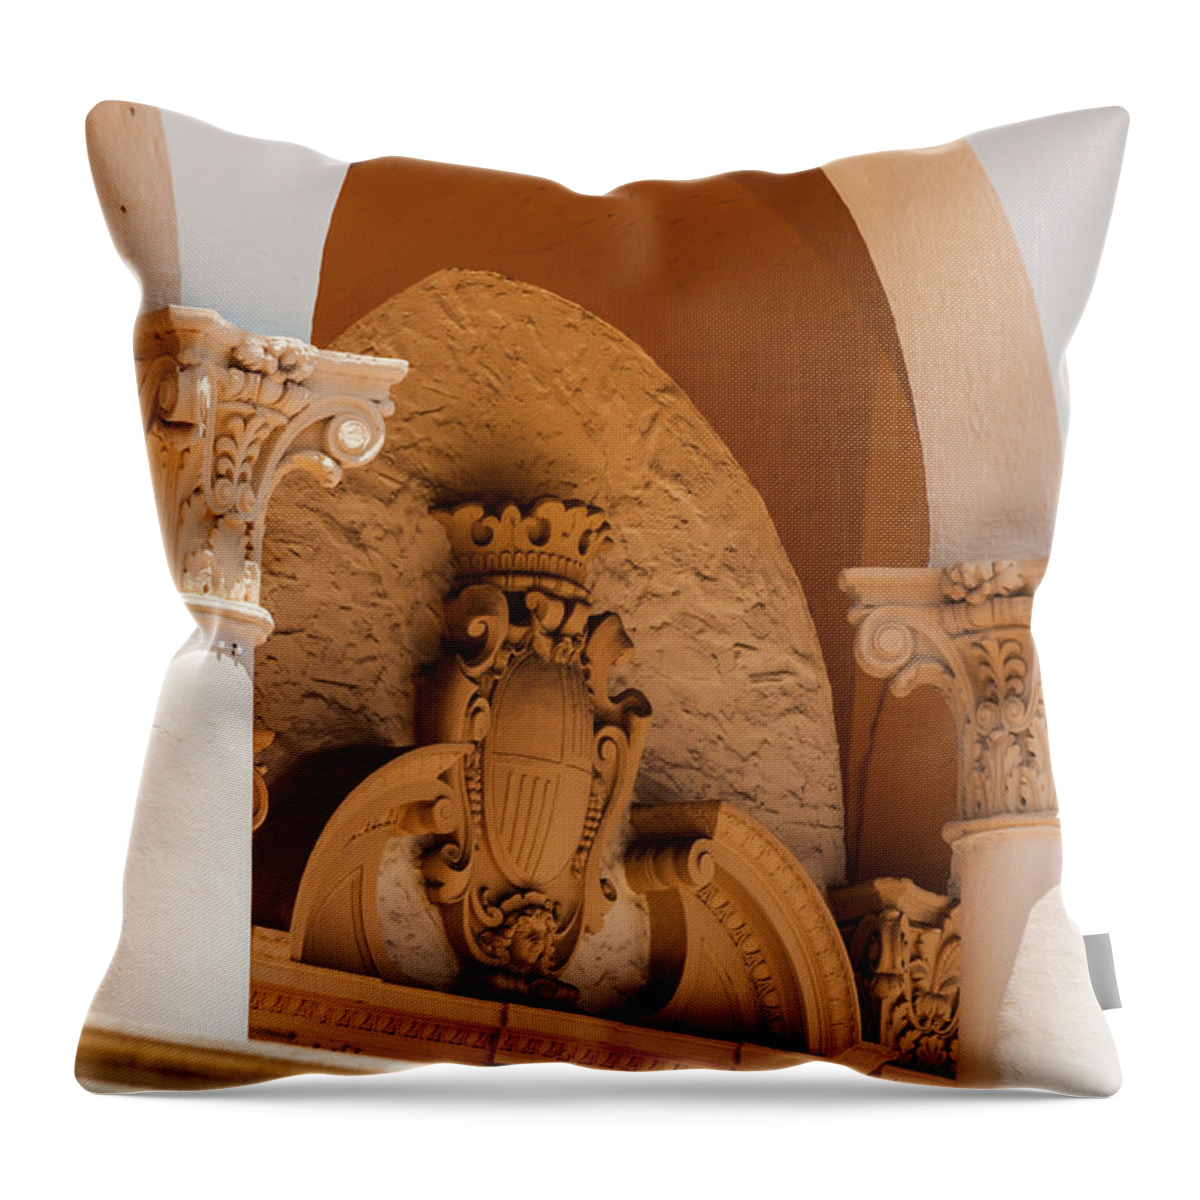 Coral Gables Biltmore Hotel Throw Pillow featuring the photograph Alto Relievo Coat of Arms by Ed Gleichman